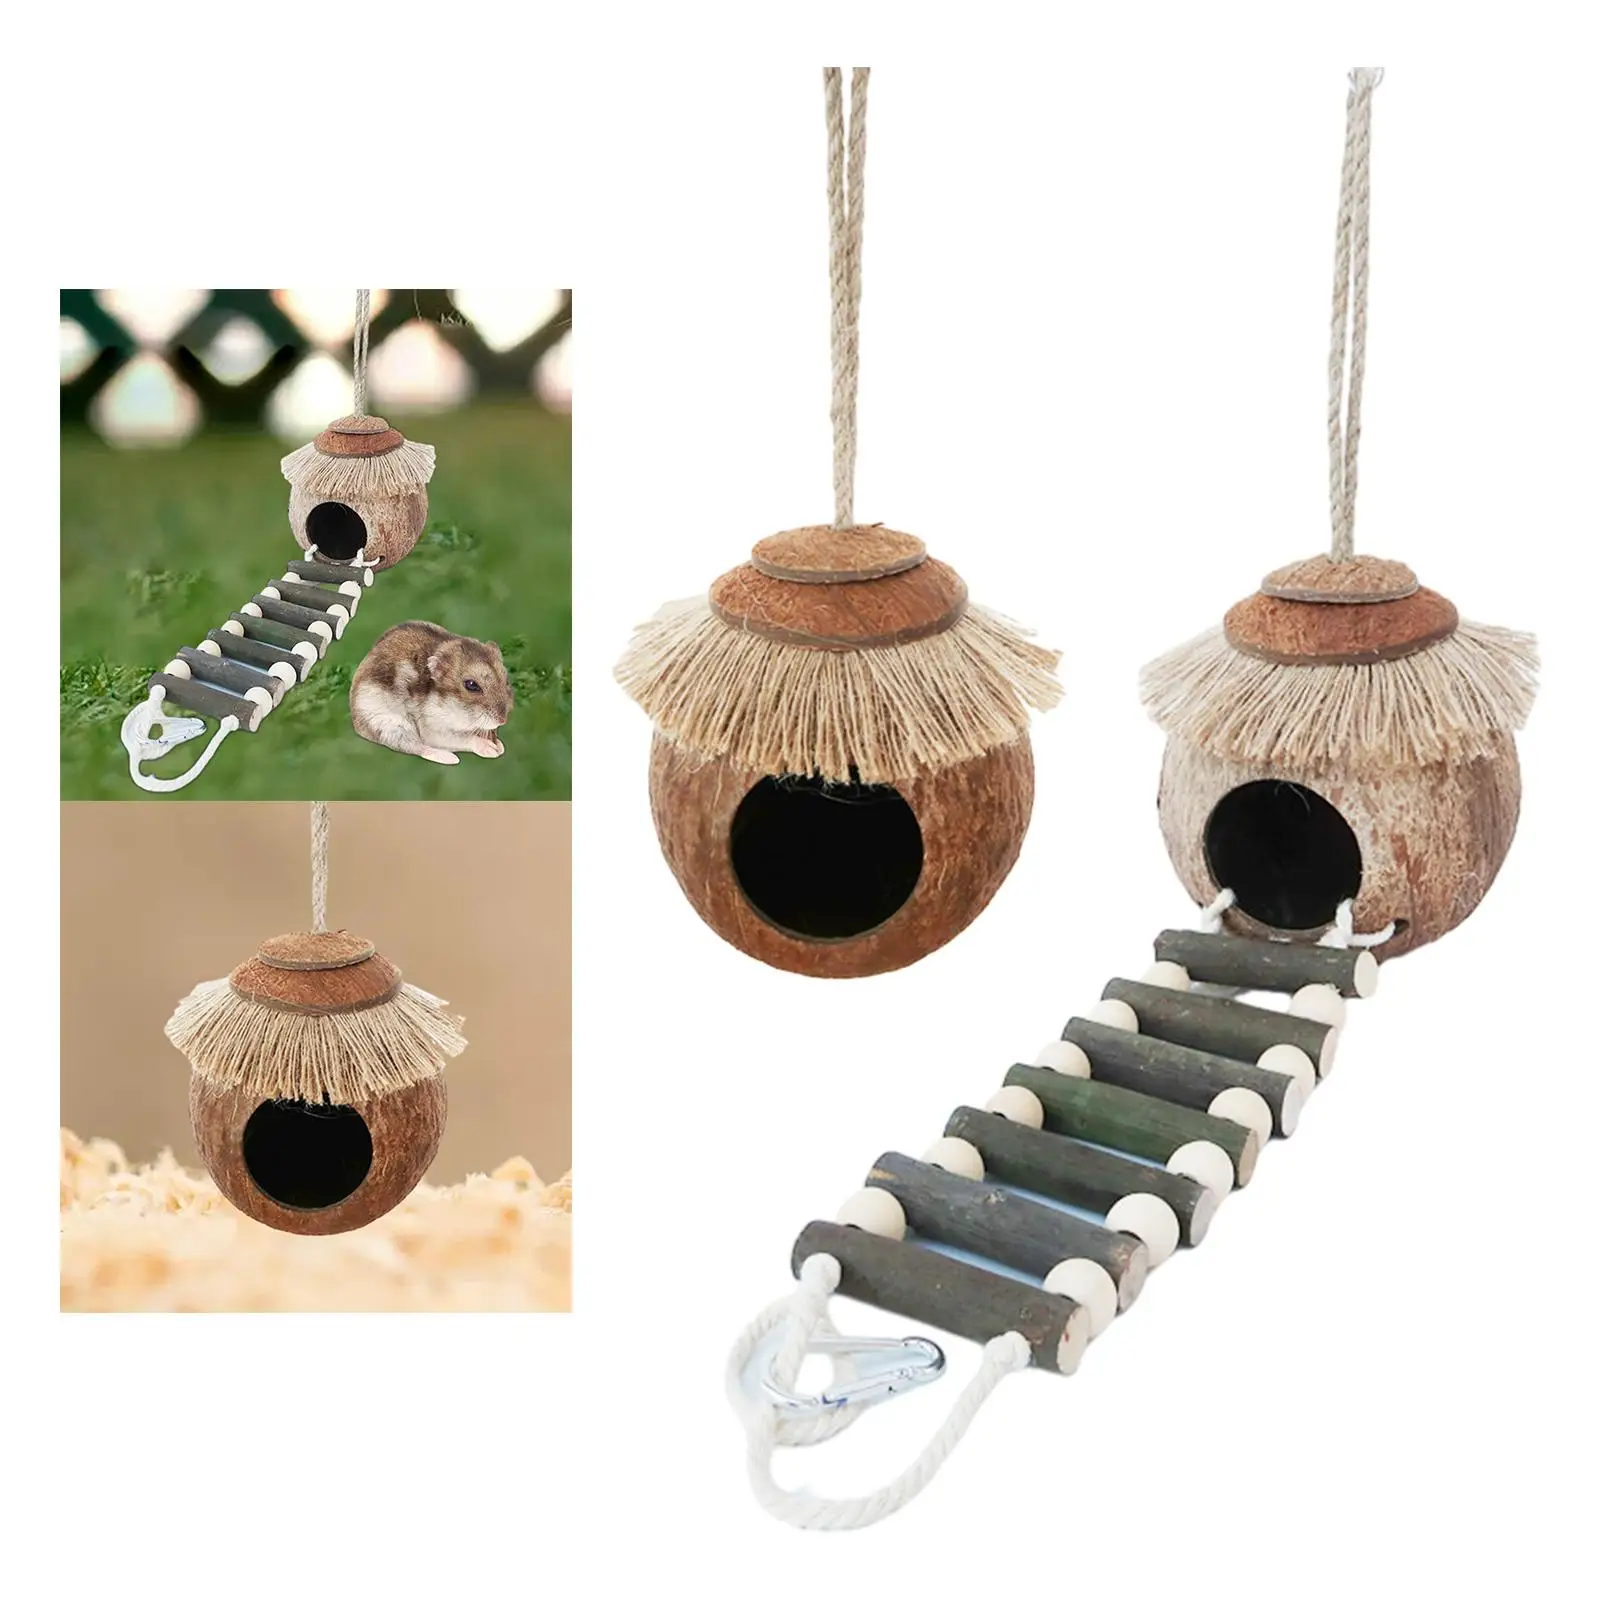 Coconut Shell Parrot Nest Hideaway Cage Hanging Toy Habitats Decor Birdhouse Cage for Bird Small Animals Budgie Parrot Hamster